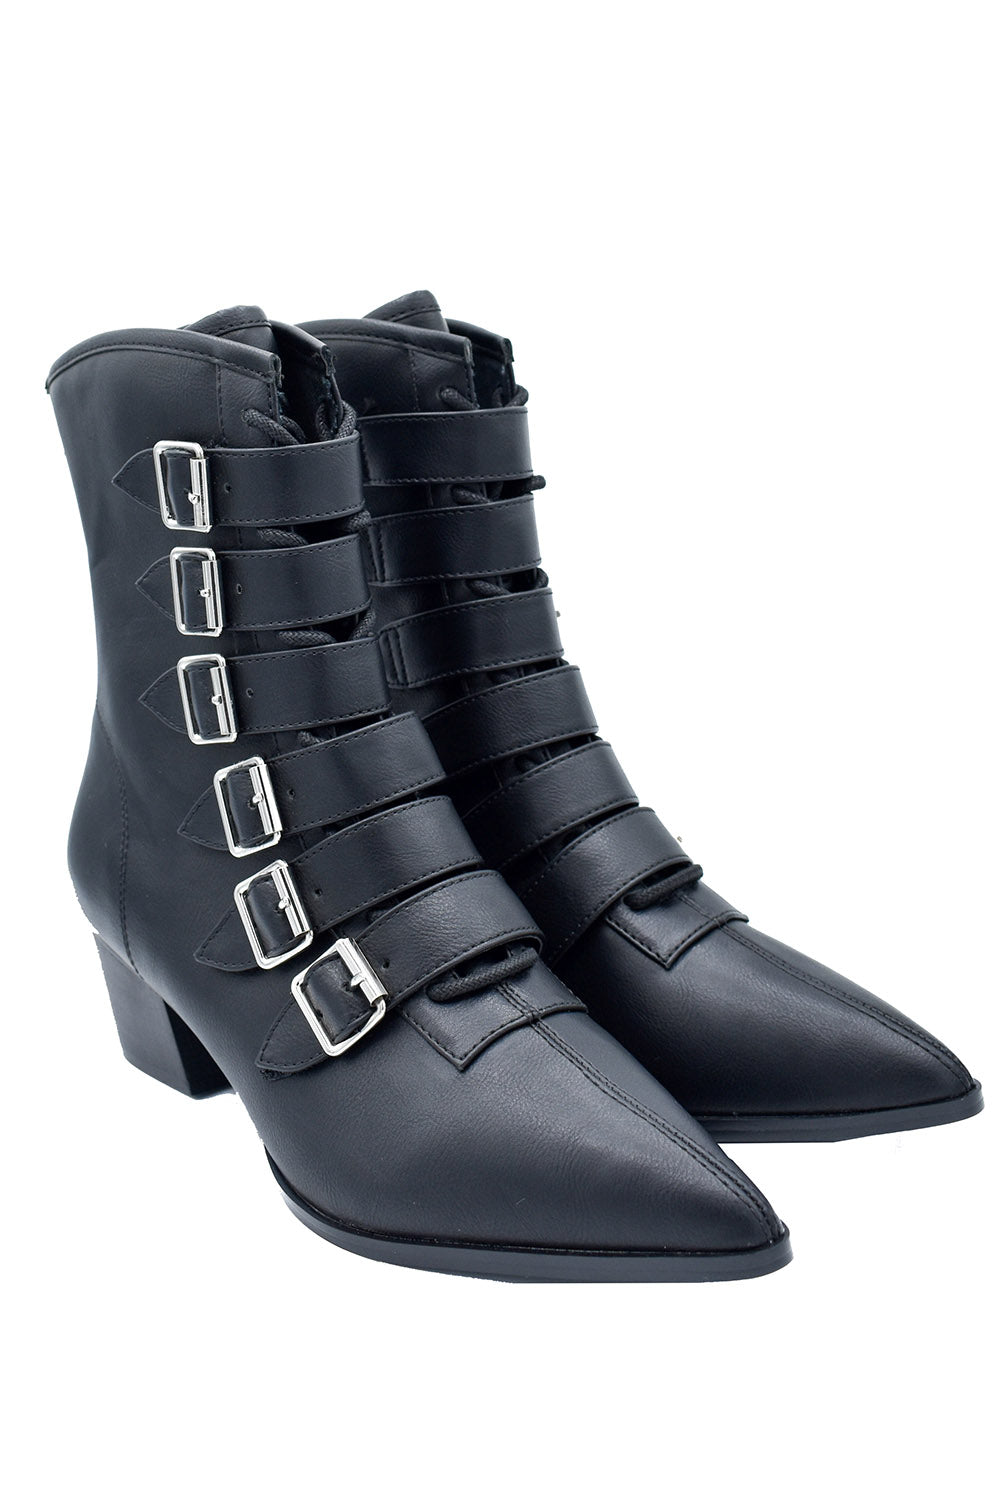 gothic witch boots